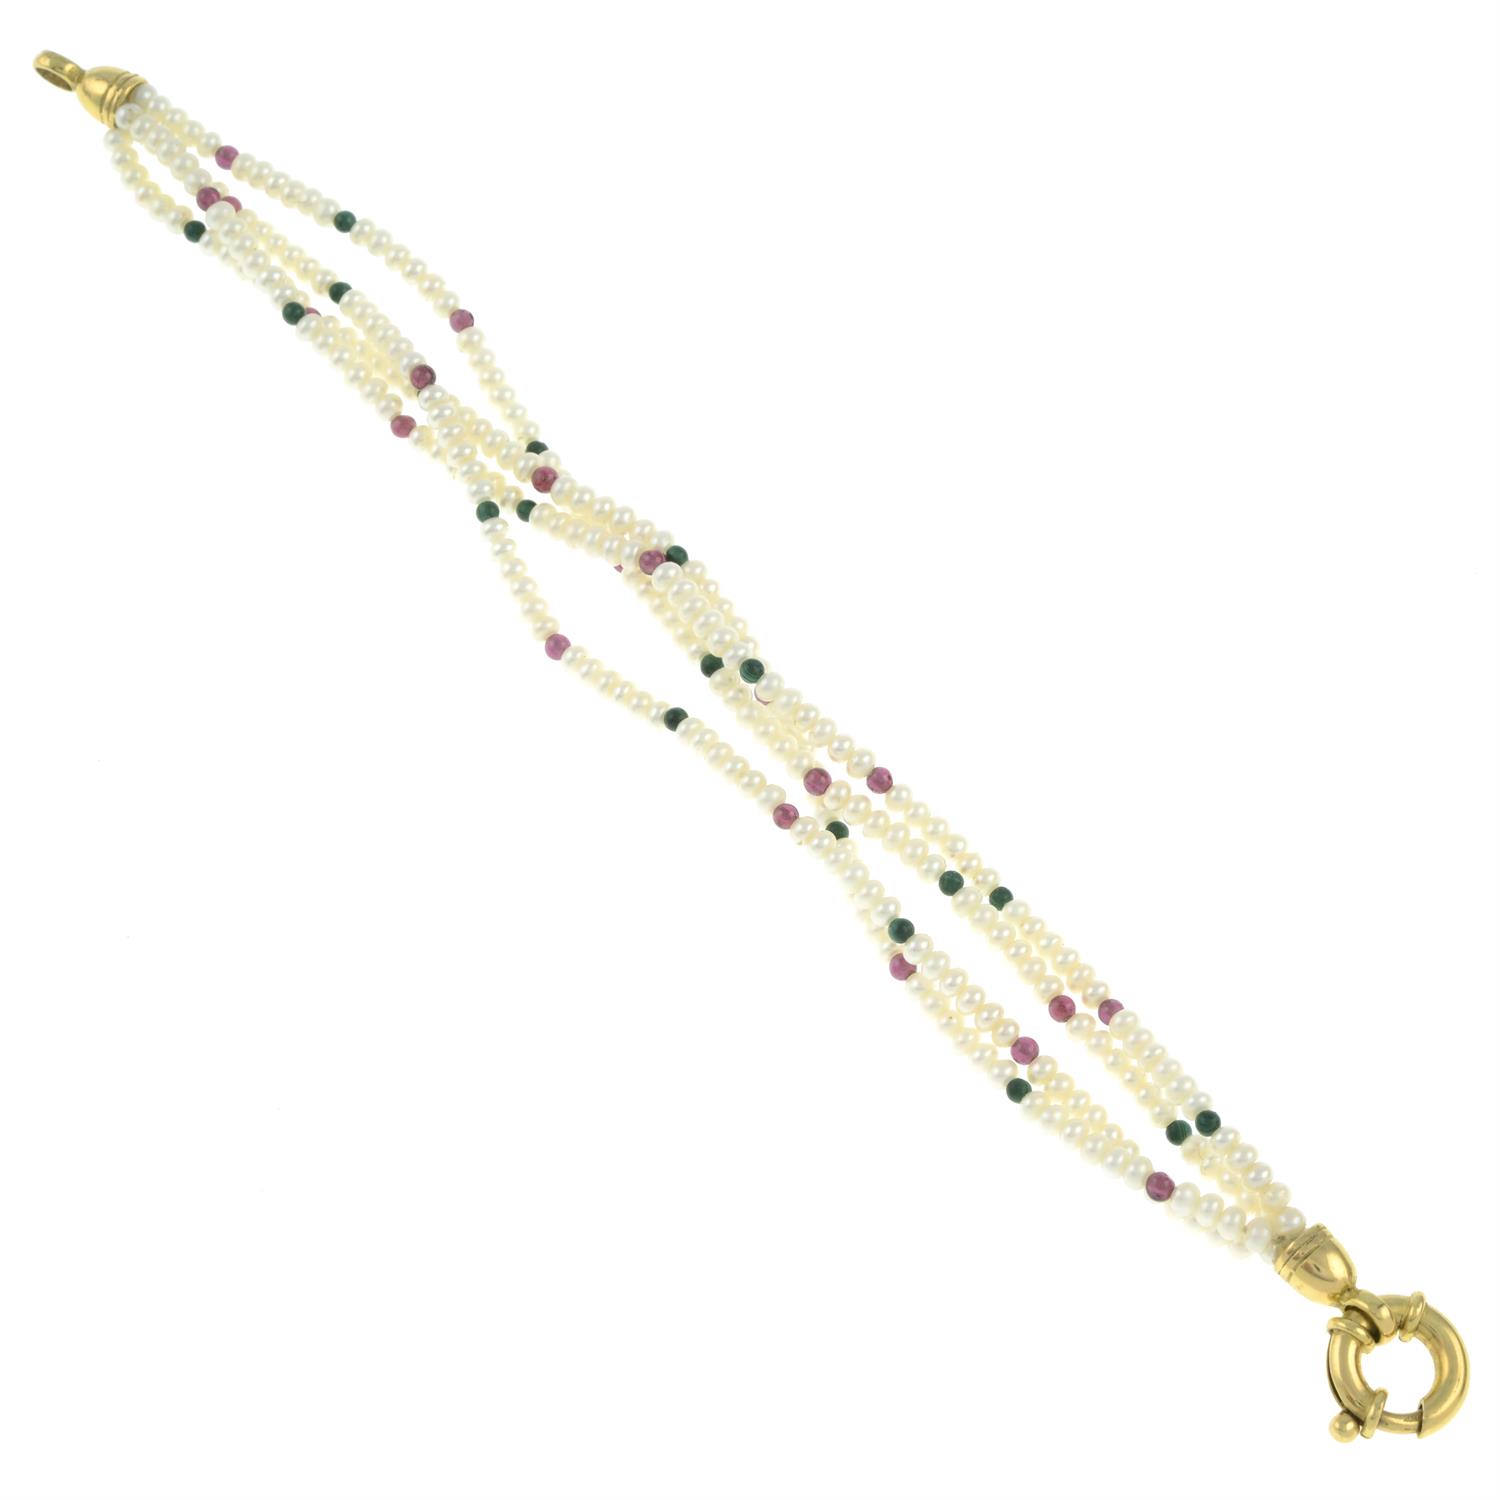 Cultured pearl bracelet, with garnet & malachite spacers - Image 2 of 2